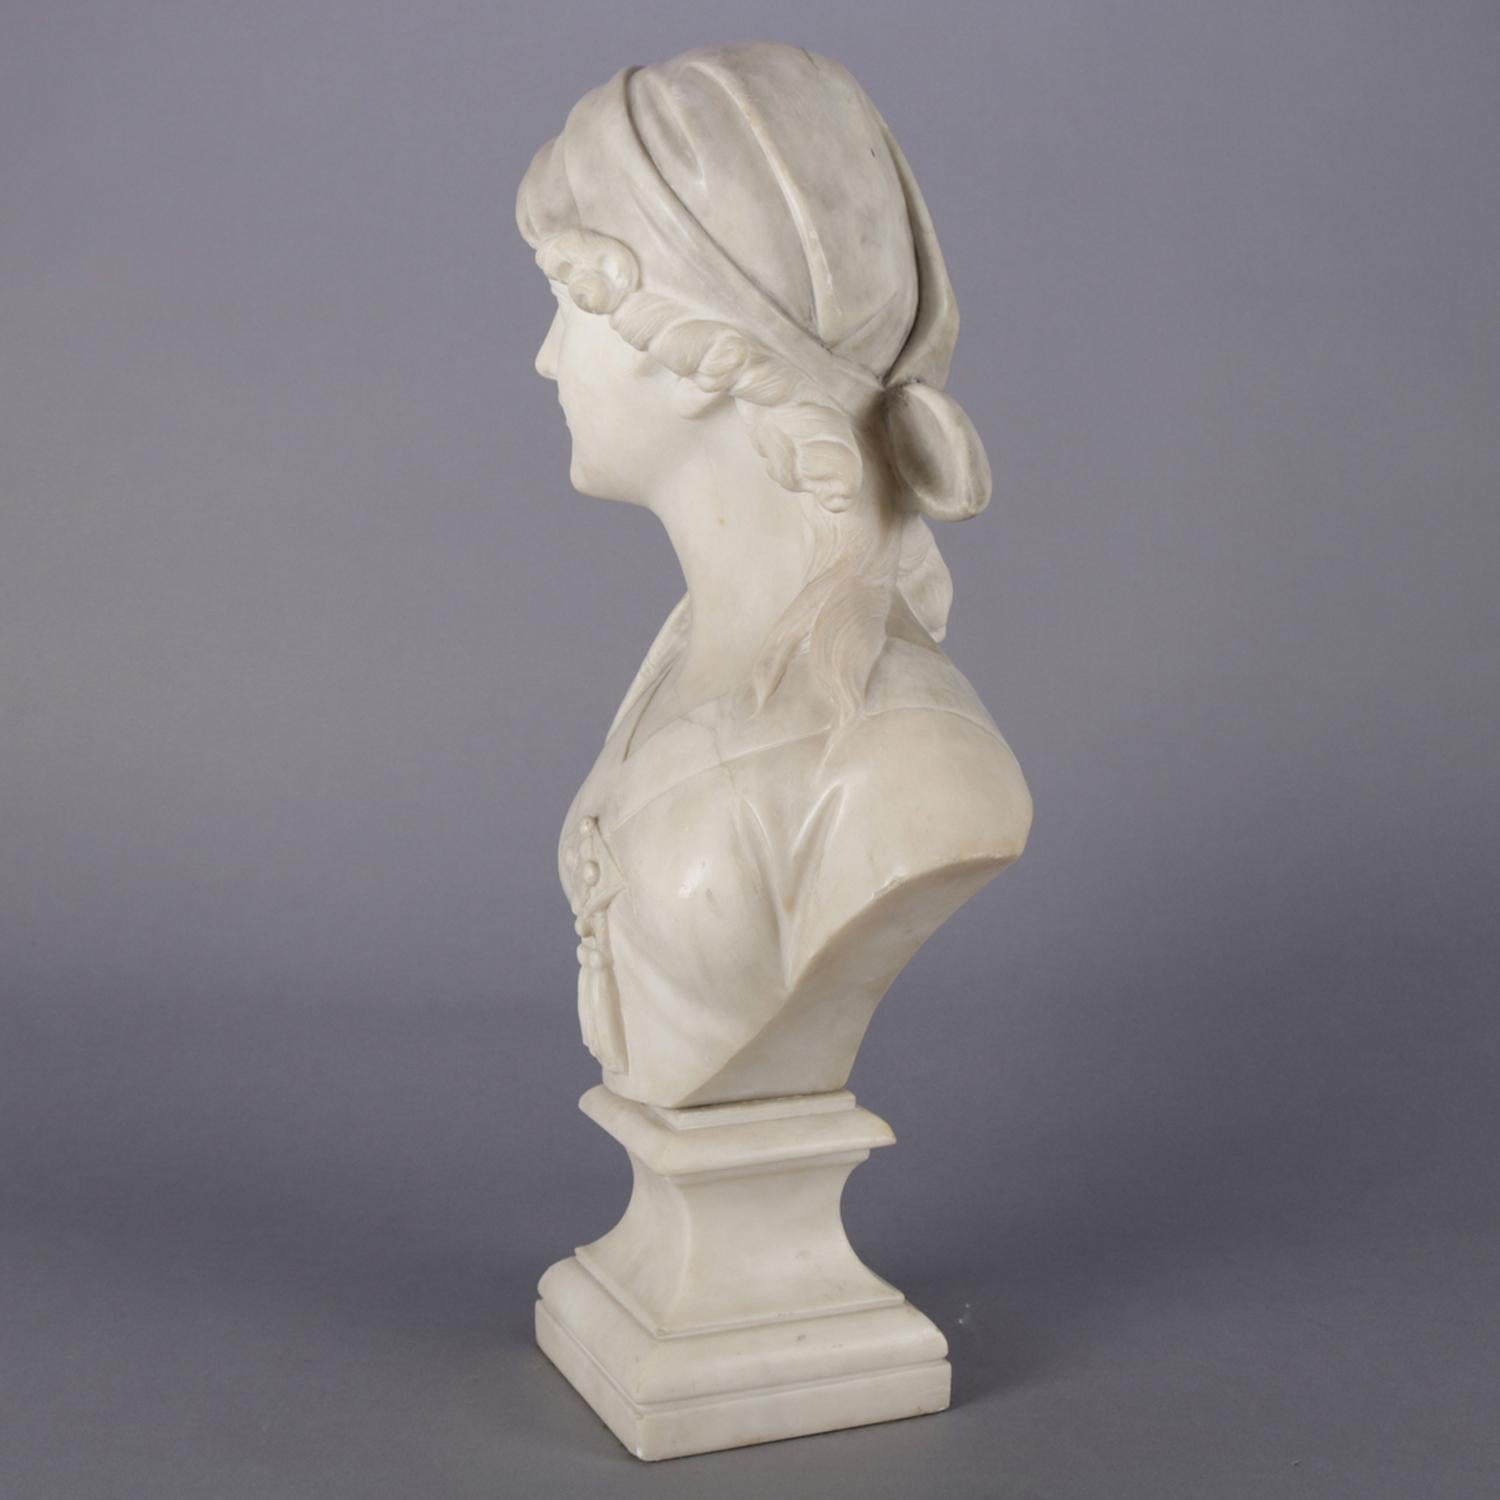 Antique Art Nouveau carved alabaster portrait sculpture 3/4 bust of young woman in Roaring 1920s dress and head scarf, en verso signed A. Cipriani (Italian, 1880-1930), circa 1910.

Measures: 21.5